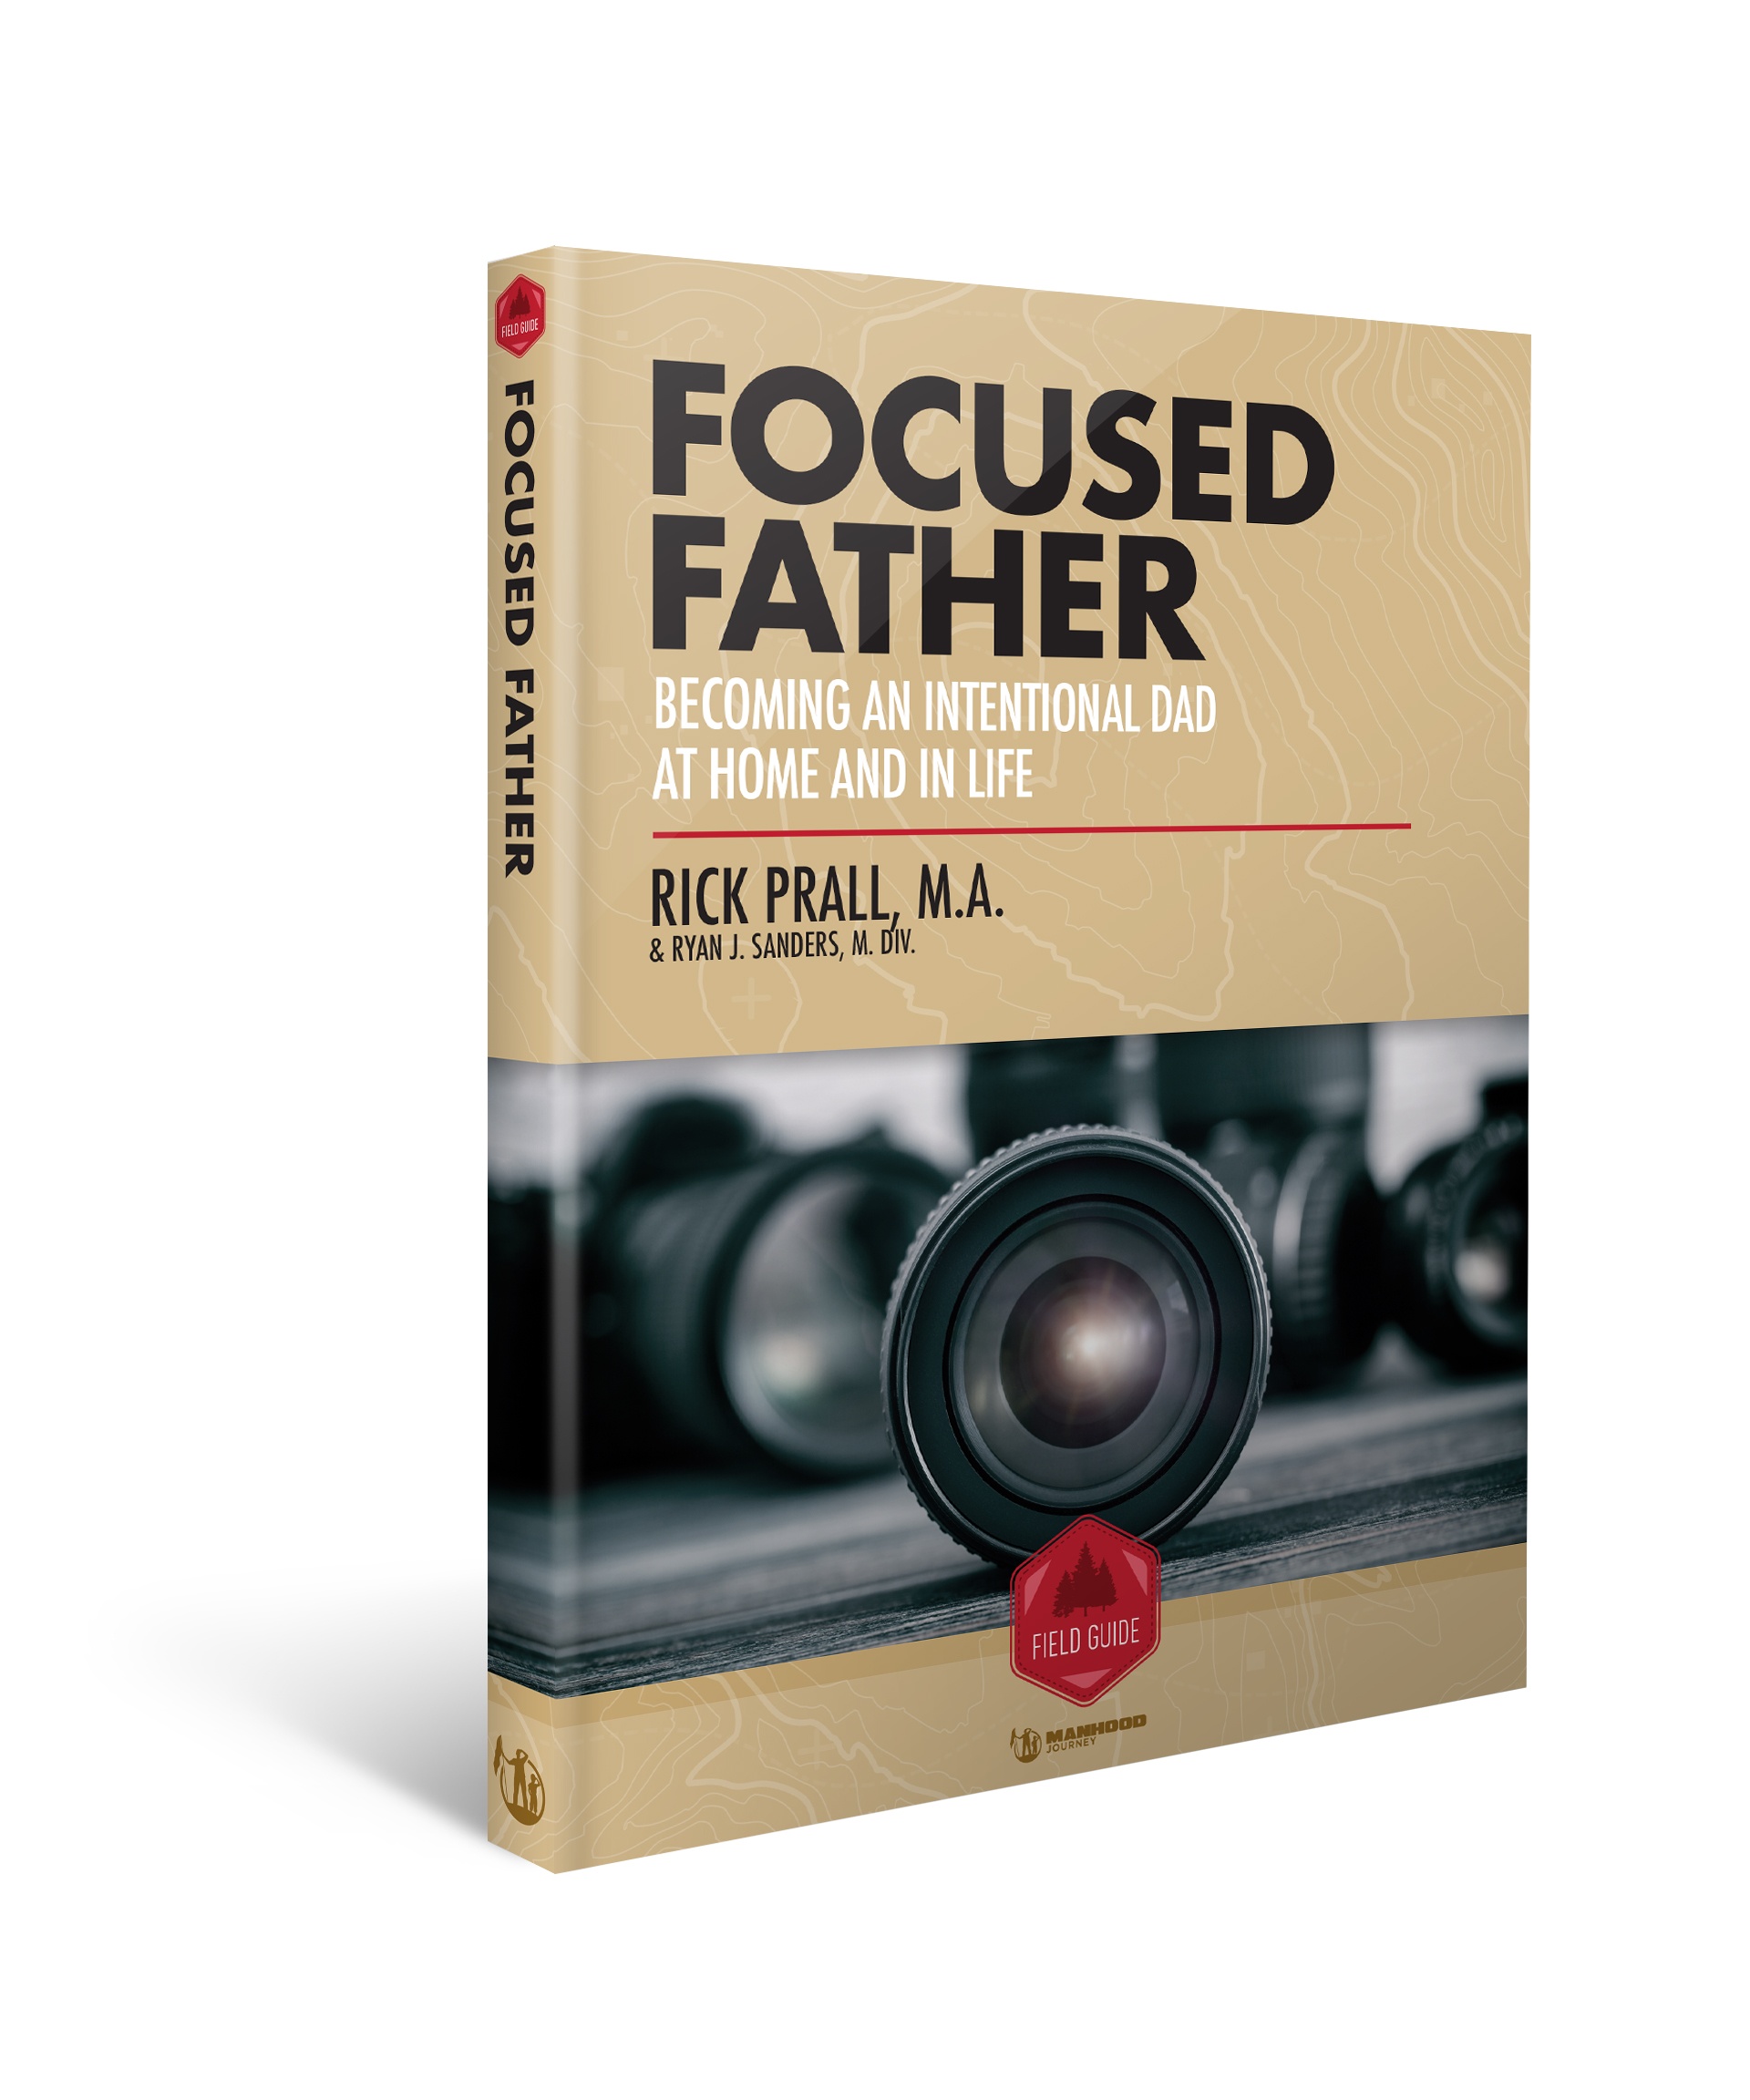 FG-FOCUSED FATHER-3D